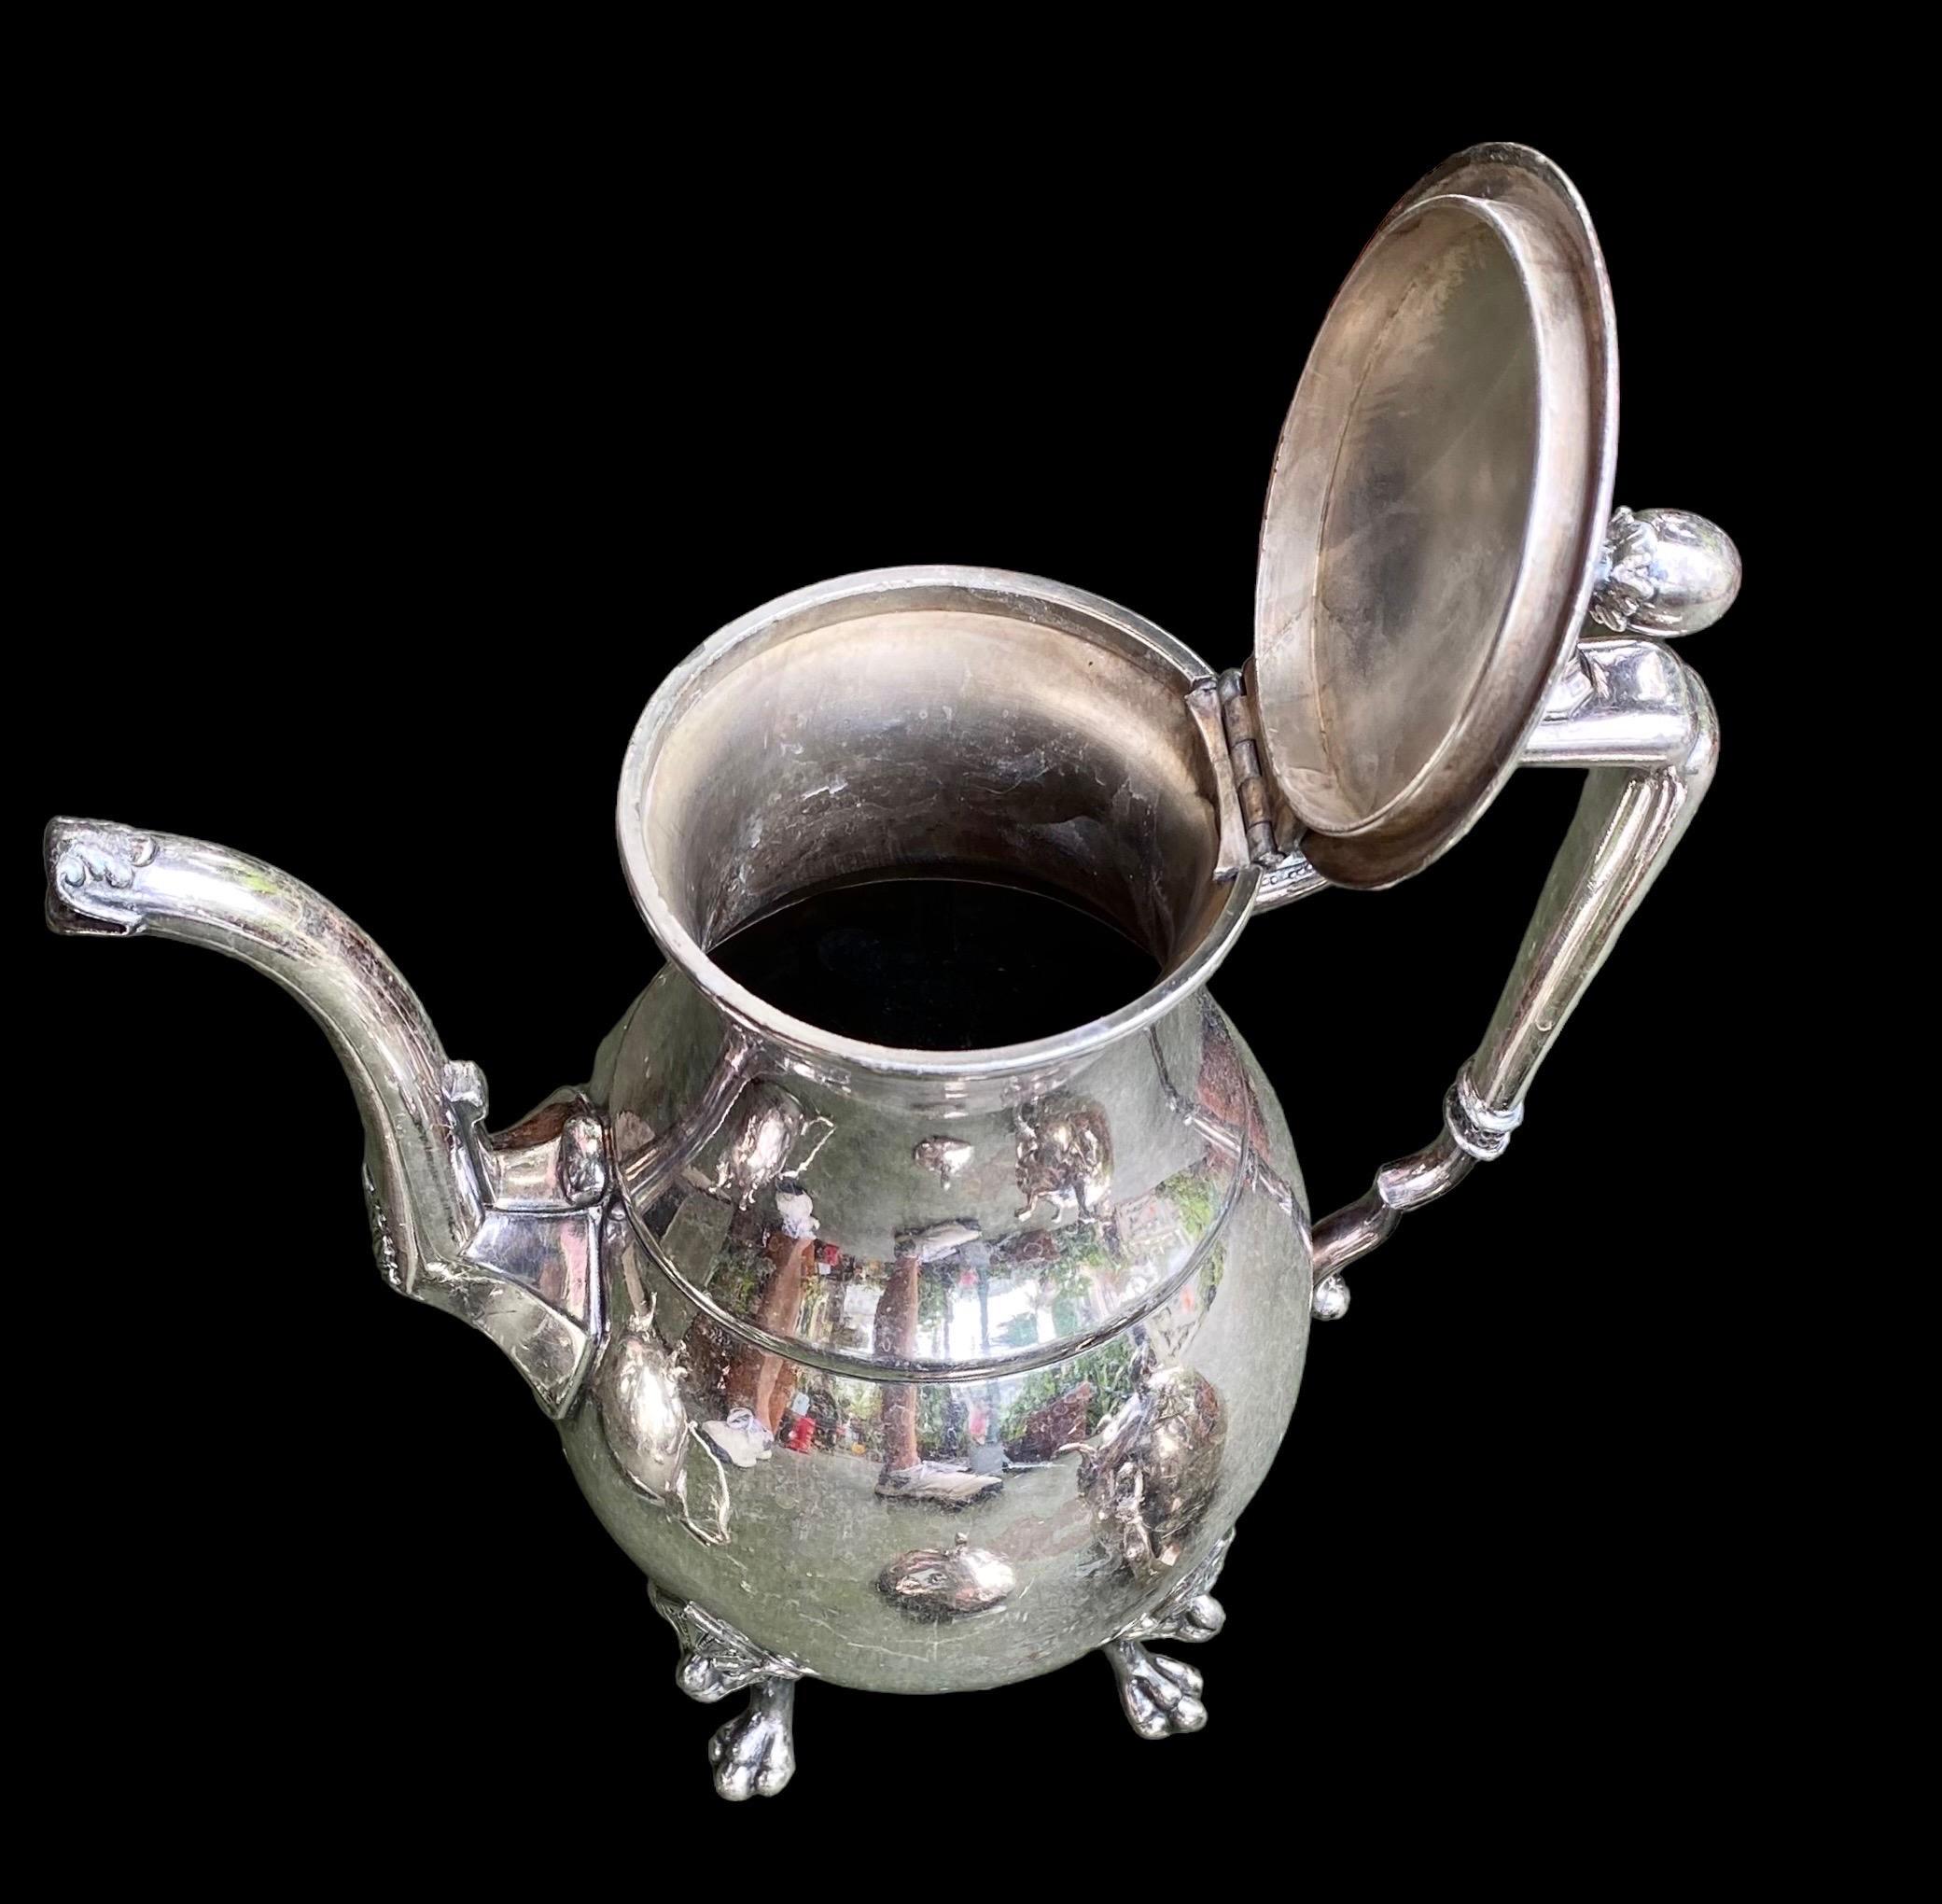 Vintage Taunton quadruple silver plated, Art Deco tea pot, sugar bowl and creamer, having hoof feet with Art Deco masks, the lids with egg shaped finials resting on tripod paw feet and beautiful geometric handles with beading and small finials c